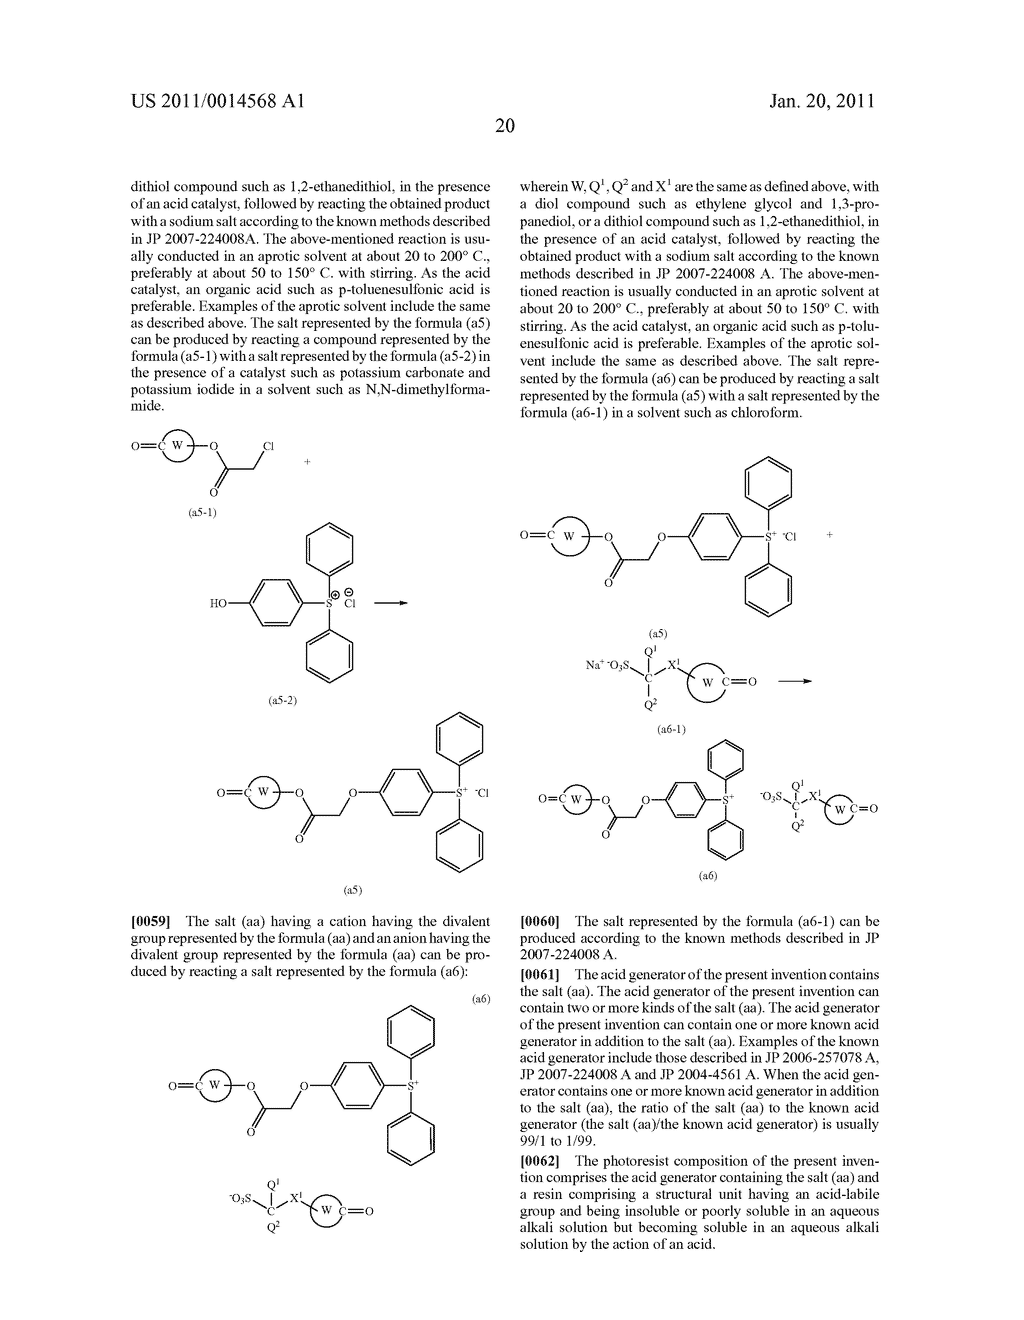 SALT AND PHOTORESIST COMPOSITION CONTAINING THE SAME - diagram, schematic, and image 21